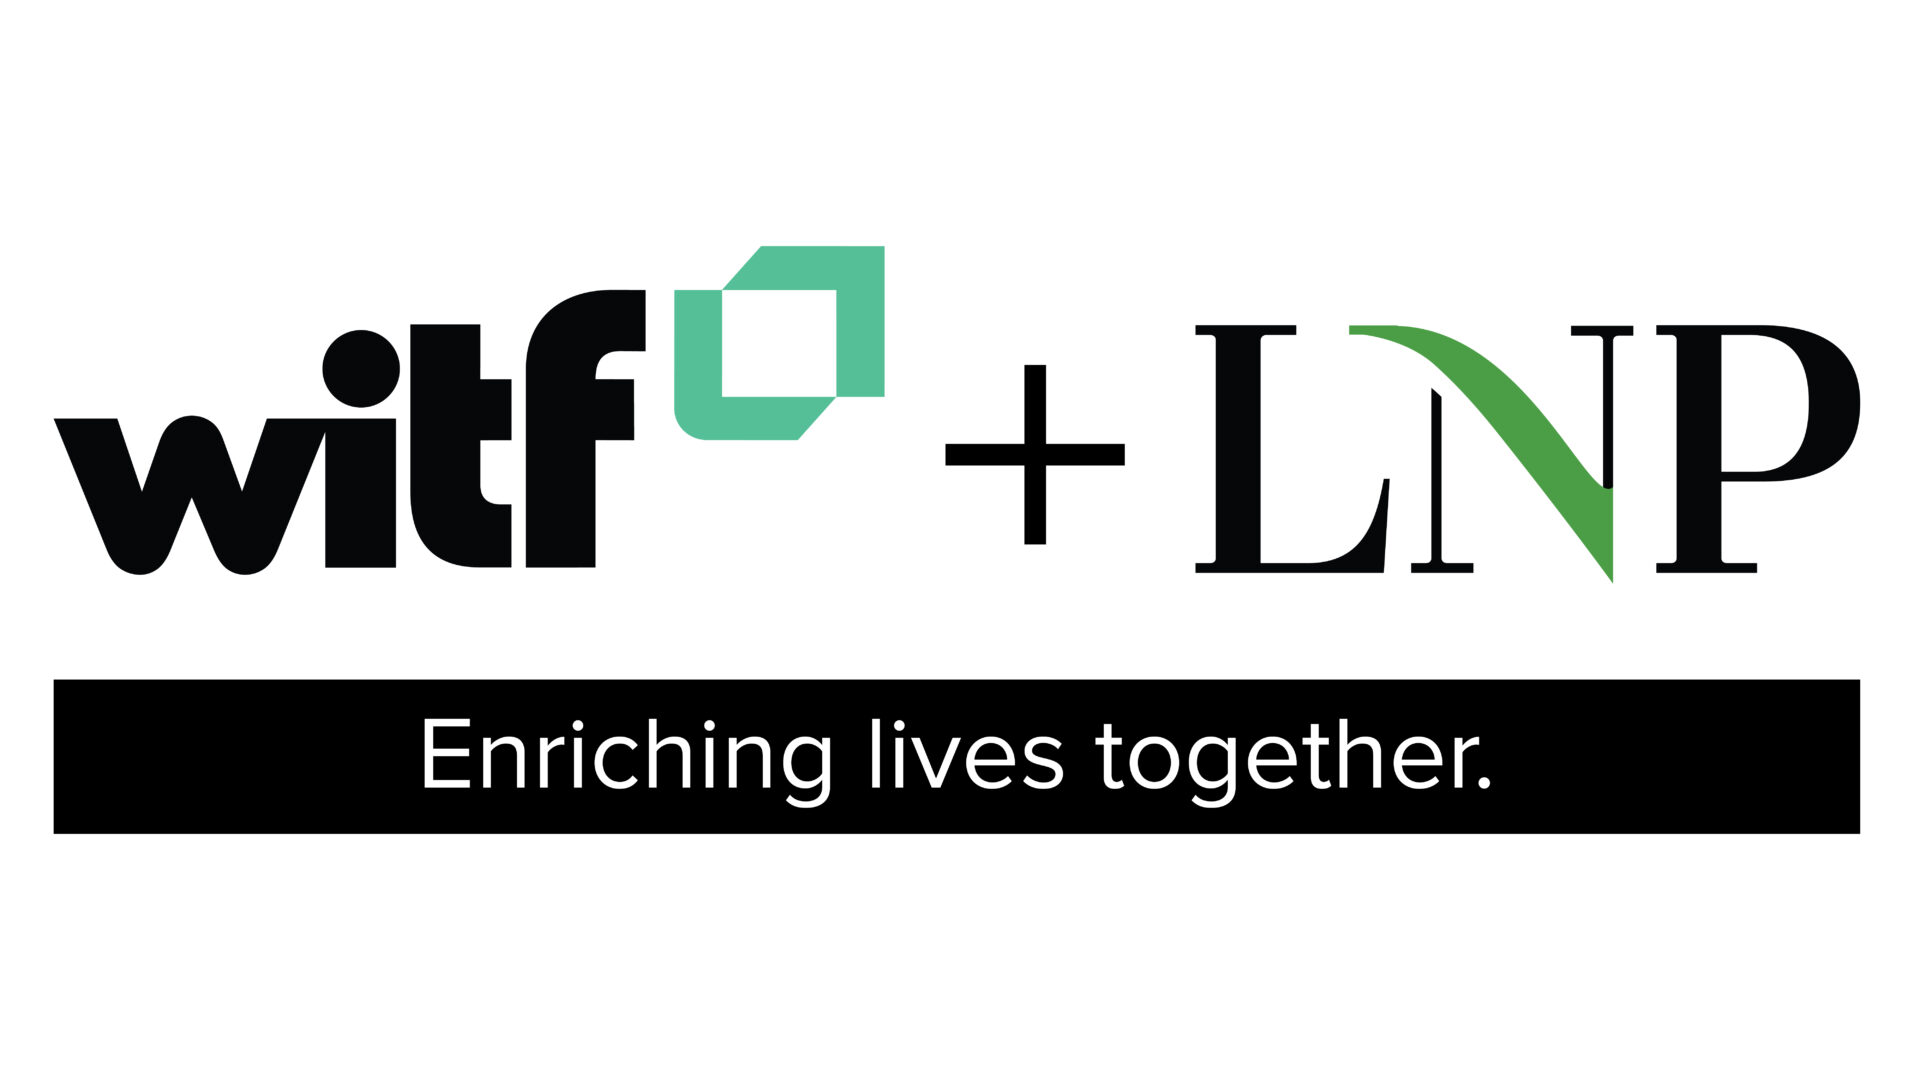 WITF and LNP logos with the tagling "enriching lives together"